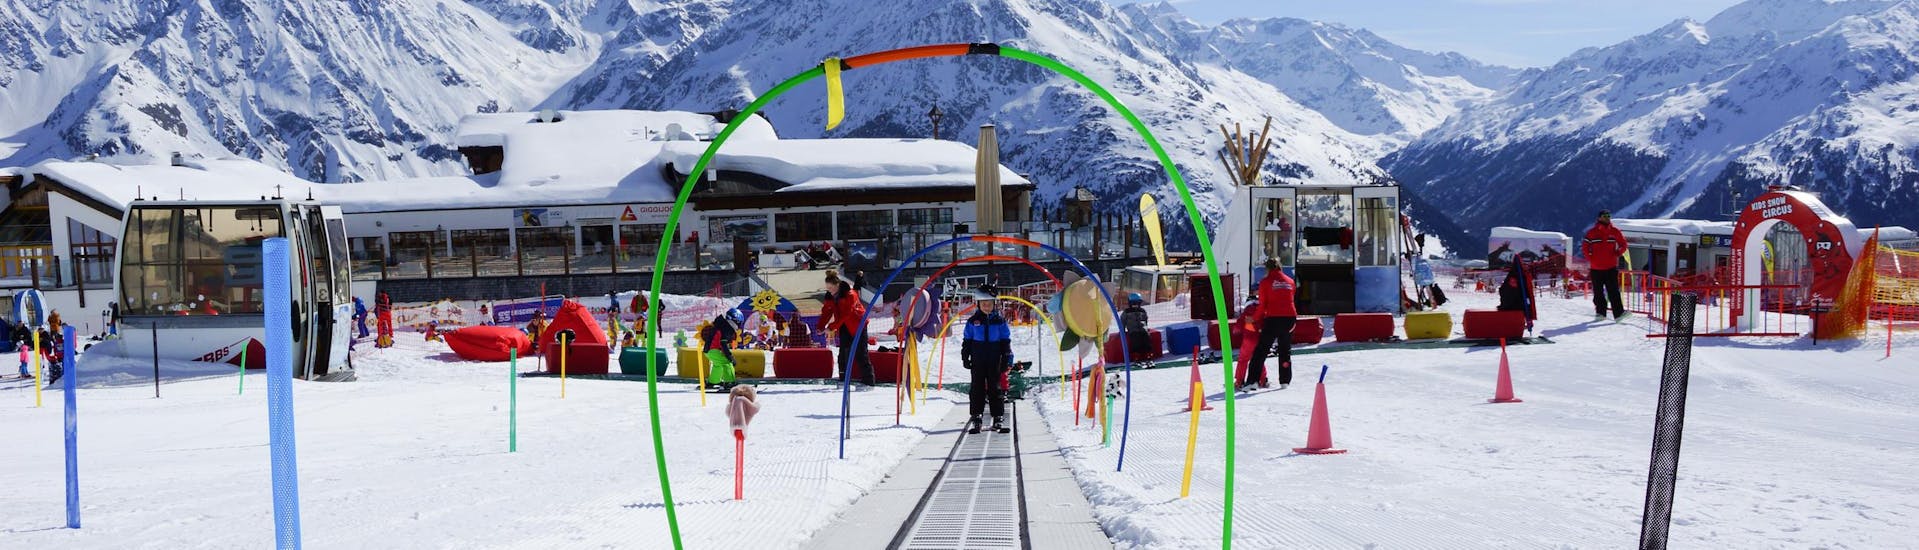 Kids Ski Lessons (4-8 y.) for First Timers incl. Ski Hire Package.